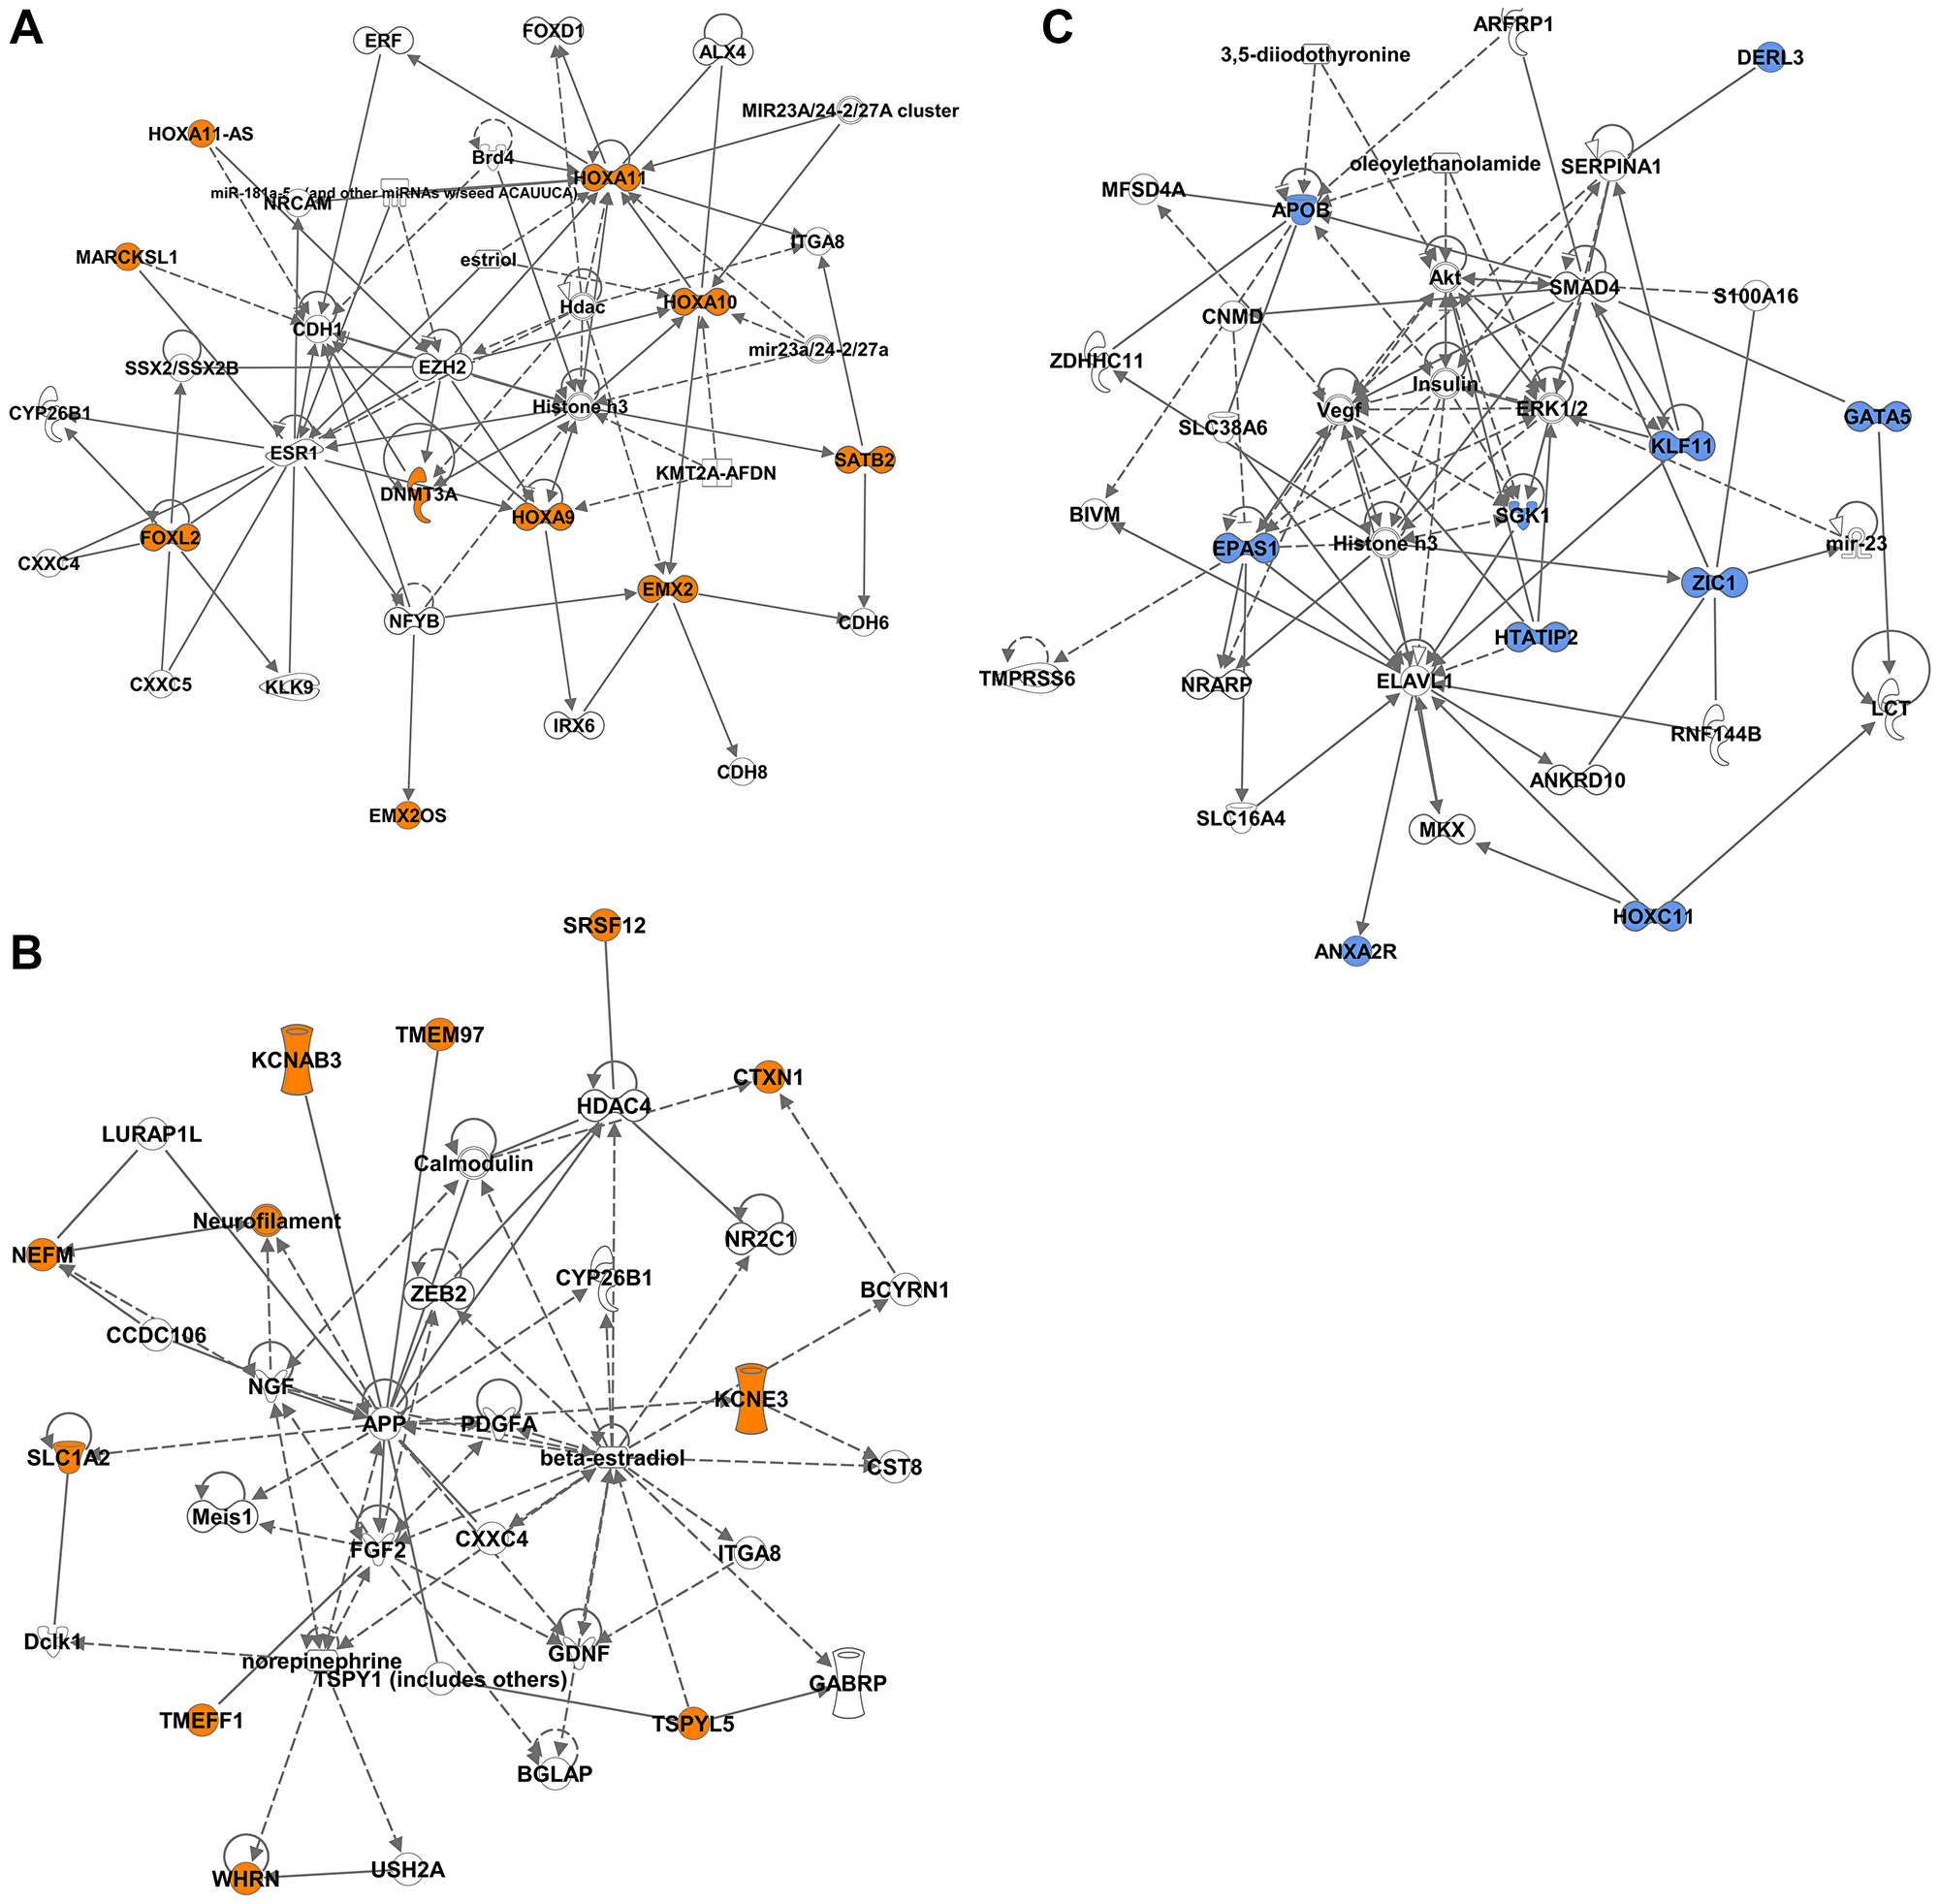 Network analysis of the DM-DEGs associated with STLMS-Hypermethylated-Downregulated and ULMS-Hypermethylated-Downregulated groups.